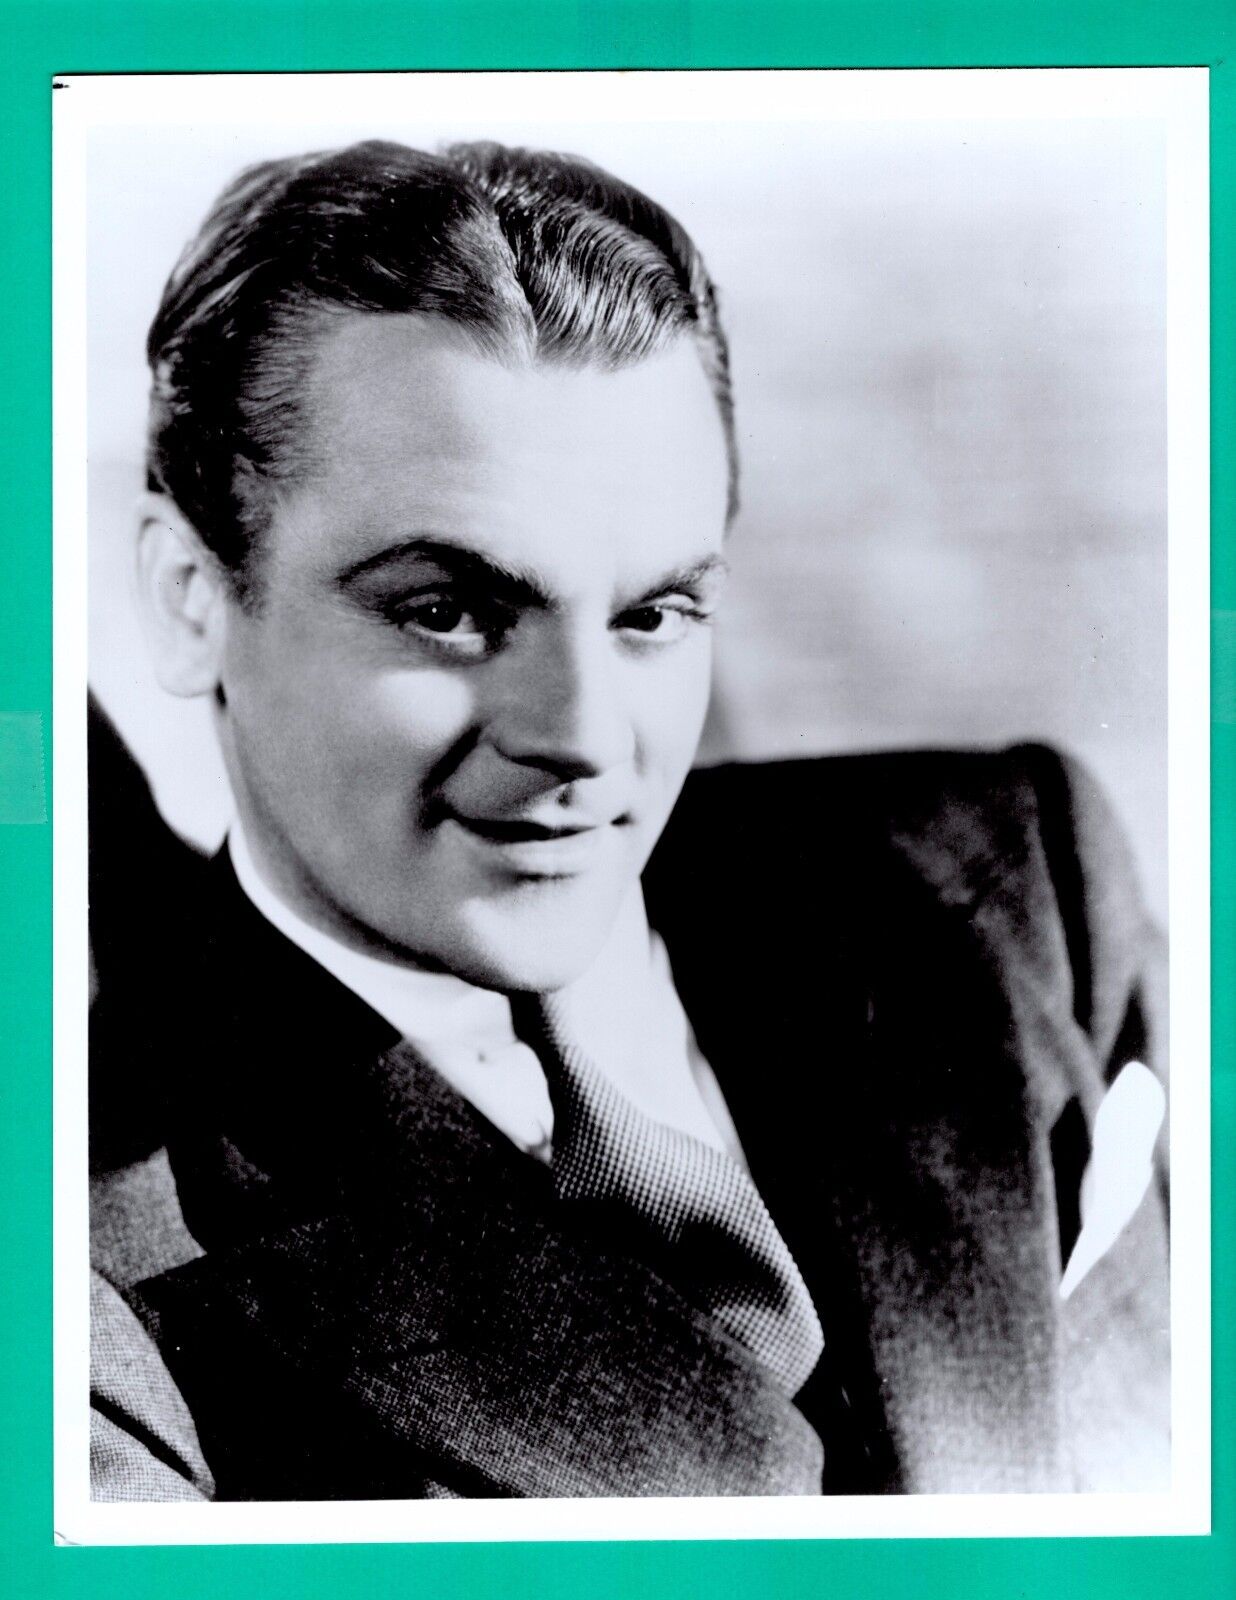 JAMES CAGNEY Movie Star Actor Promo Vintage Photo Poster painting 8x10